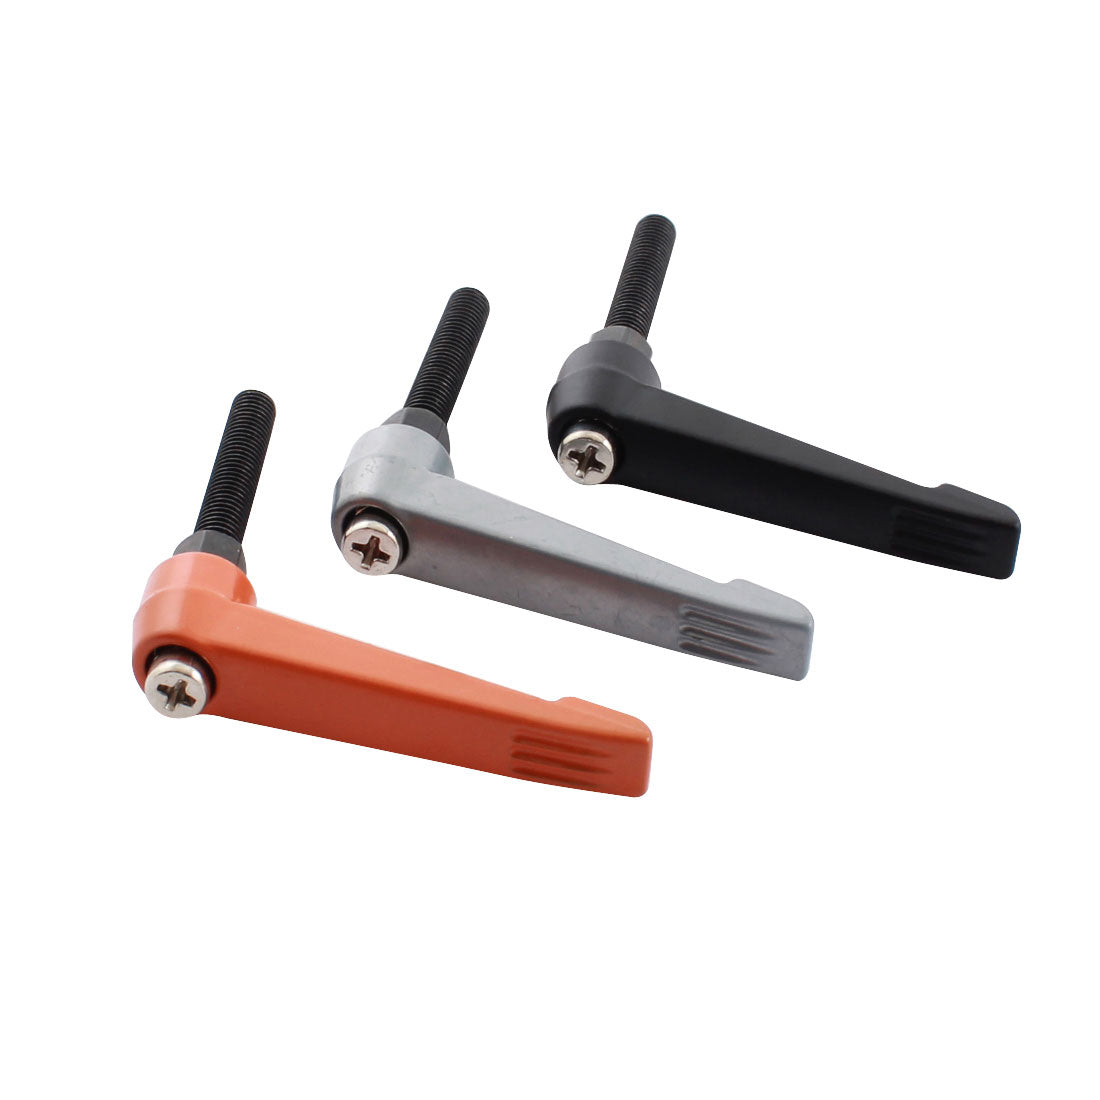 uxcell Uxcell 3PCS M6x35mm Male Thread 60mm Clamping Lever Adjustable Metal Knob Handle Grip Orange Black Silver Tone for Machinery